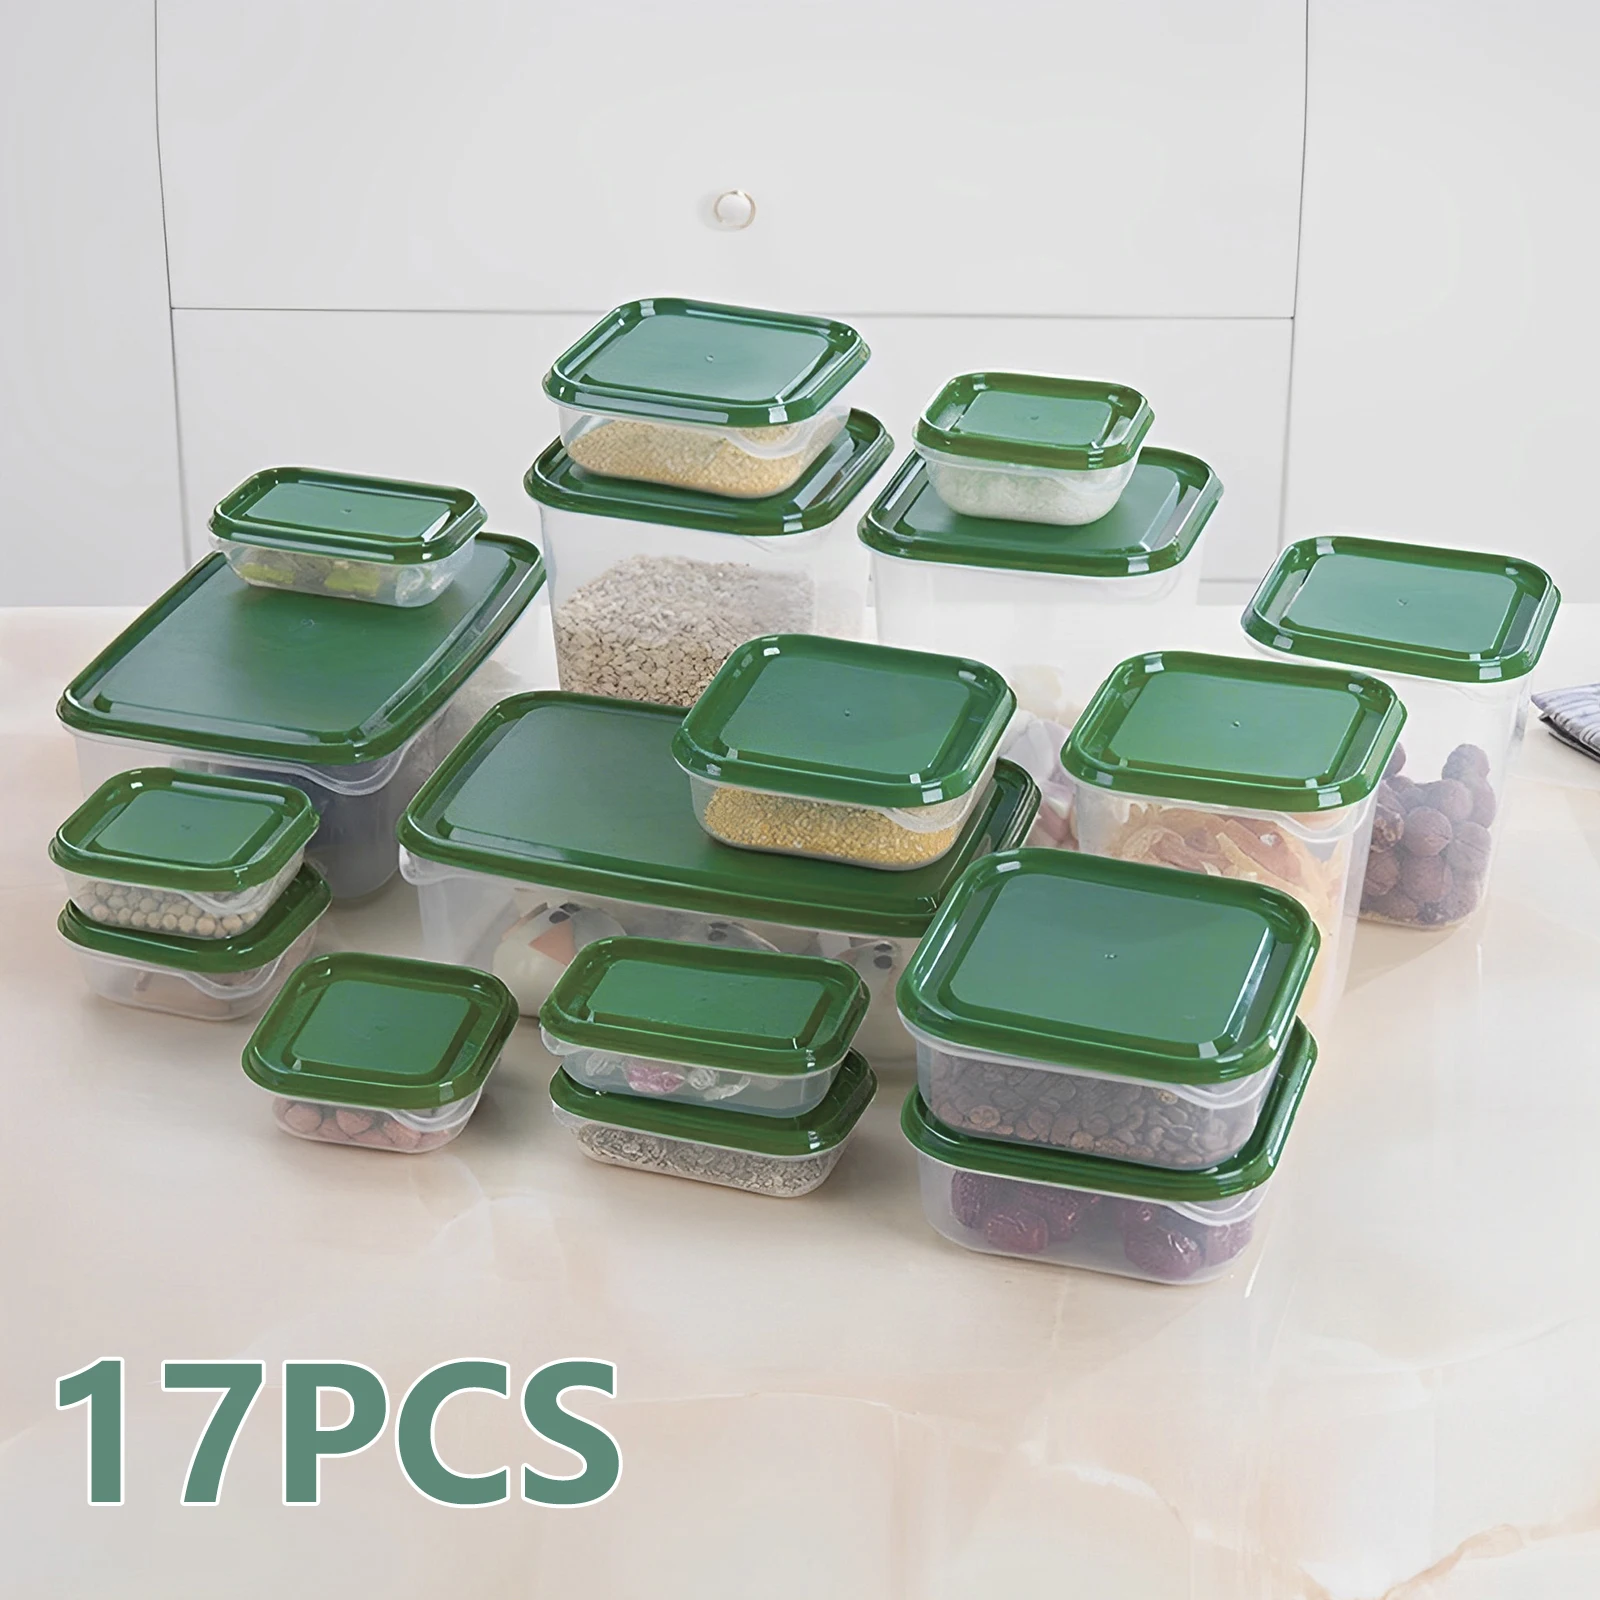 https://ae01.alicdn.com/kf/S31b9180b854d423fbd084702fe3e8847G/17Pcs-Food-Storage-Container-with-Lids-Stackable-Food-Storage-Box-Clear-Meal-Prep-Containers-Food-Grade.jpg